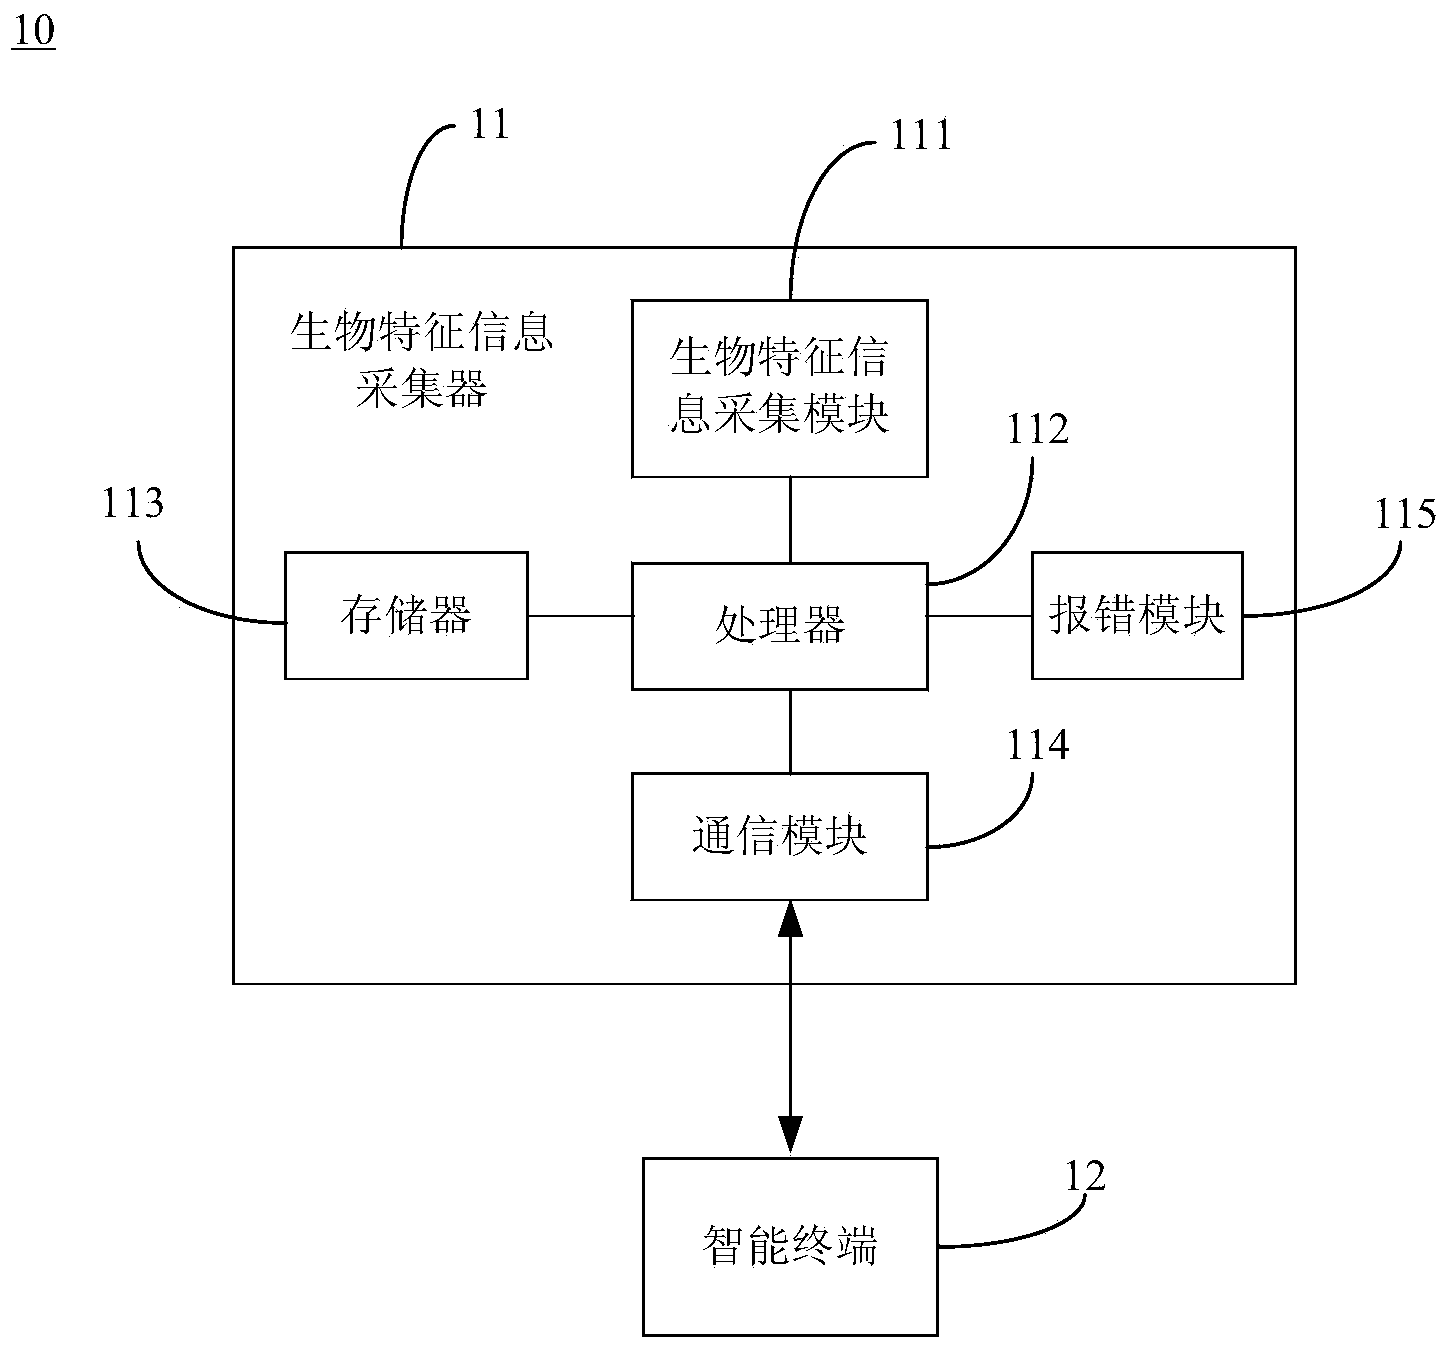 Personal account information security management system and method based on biologic characteristic information verification